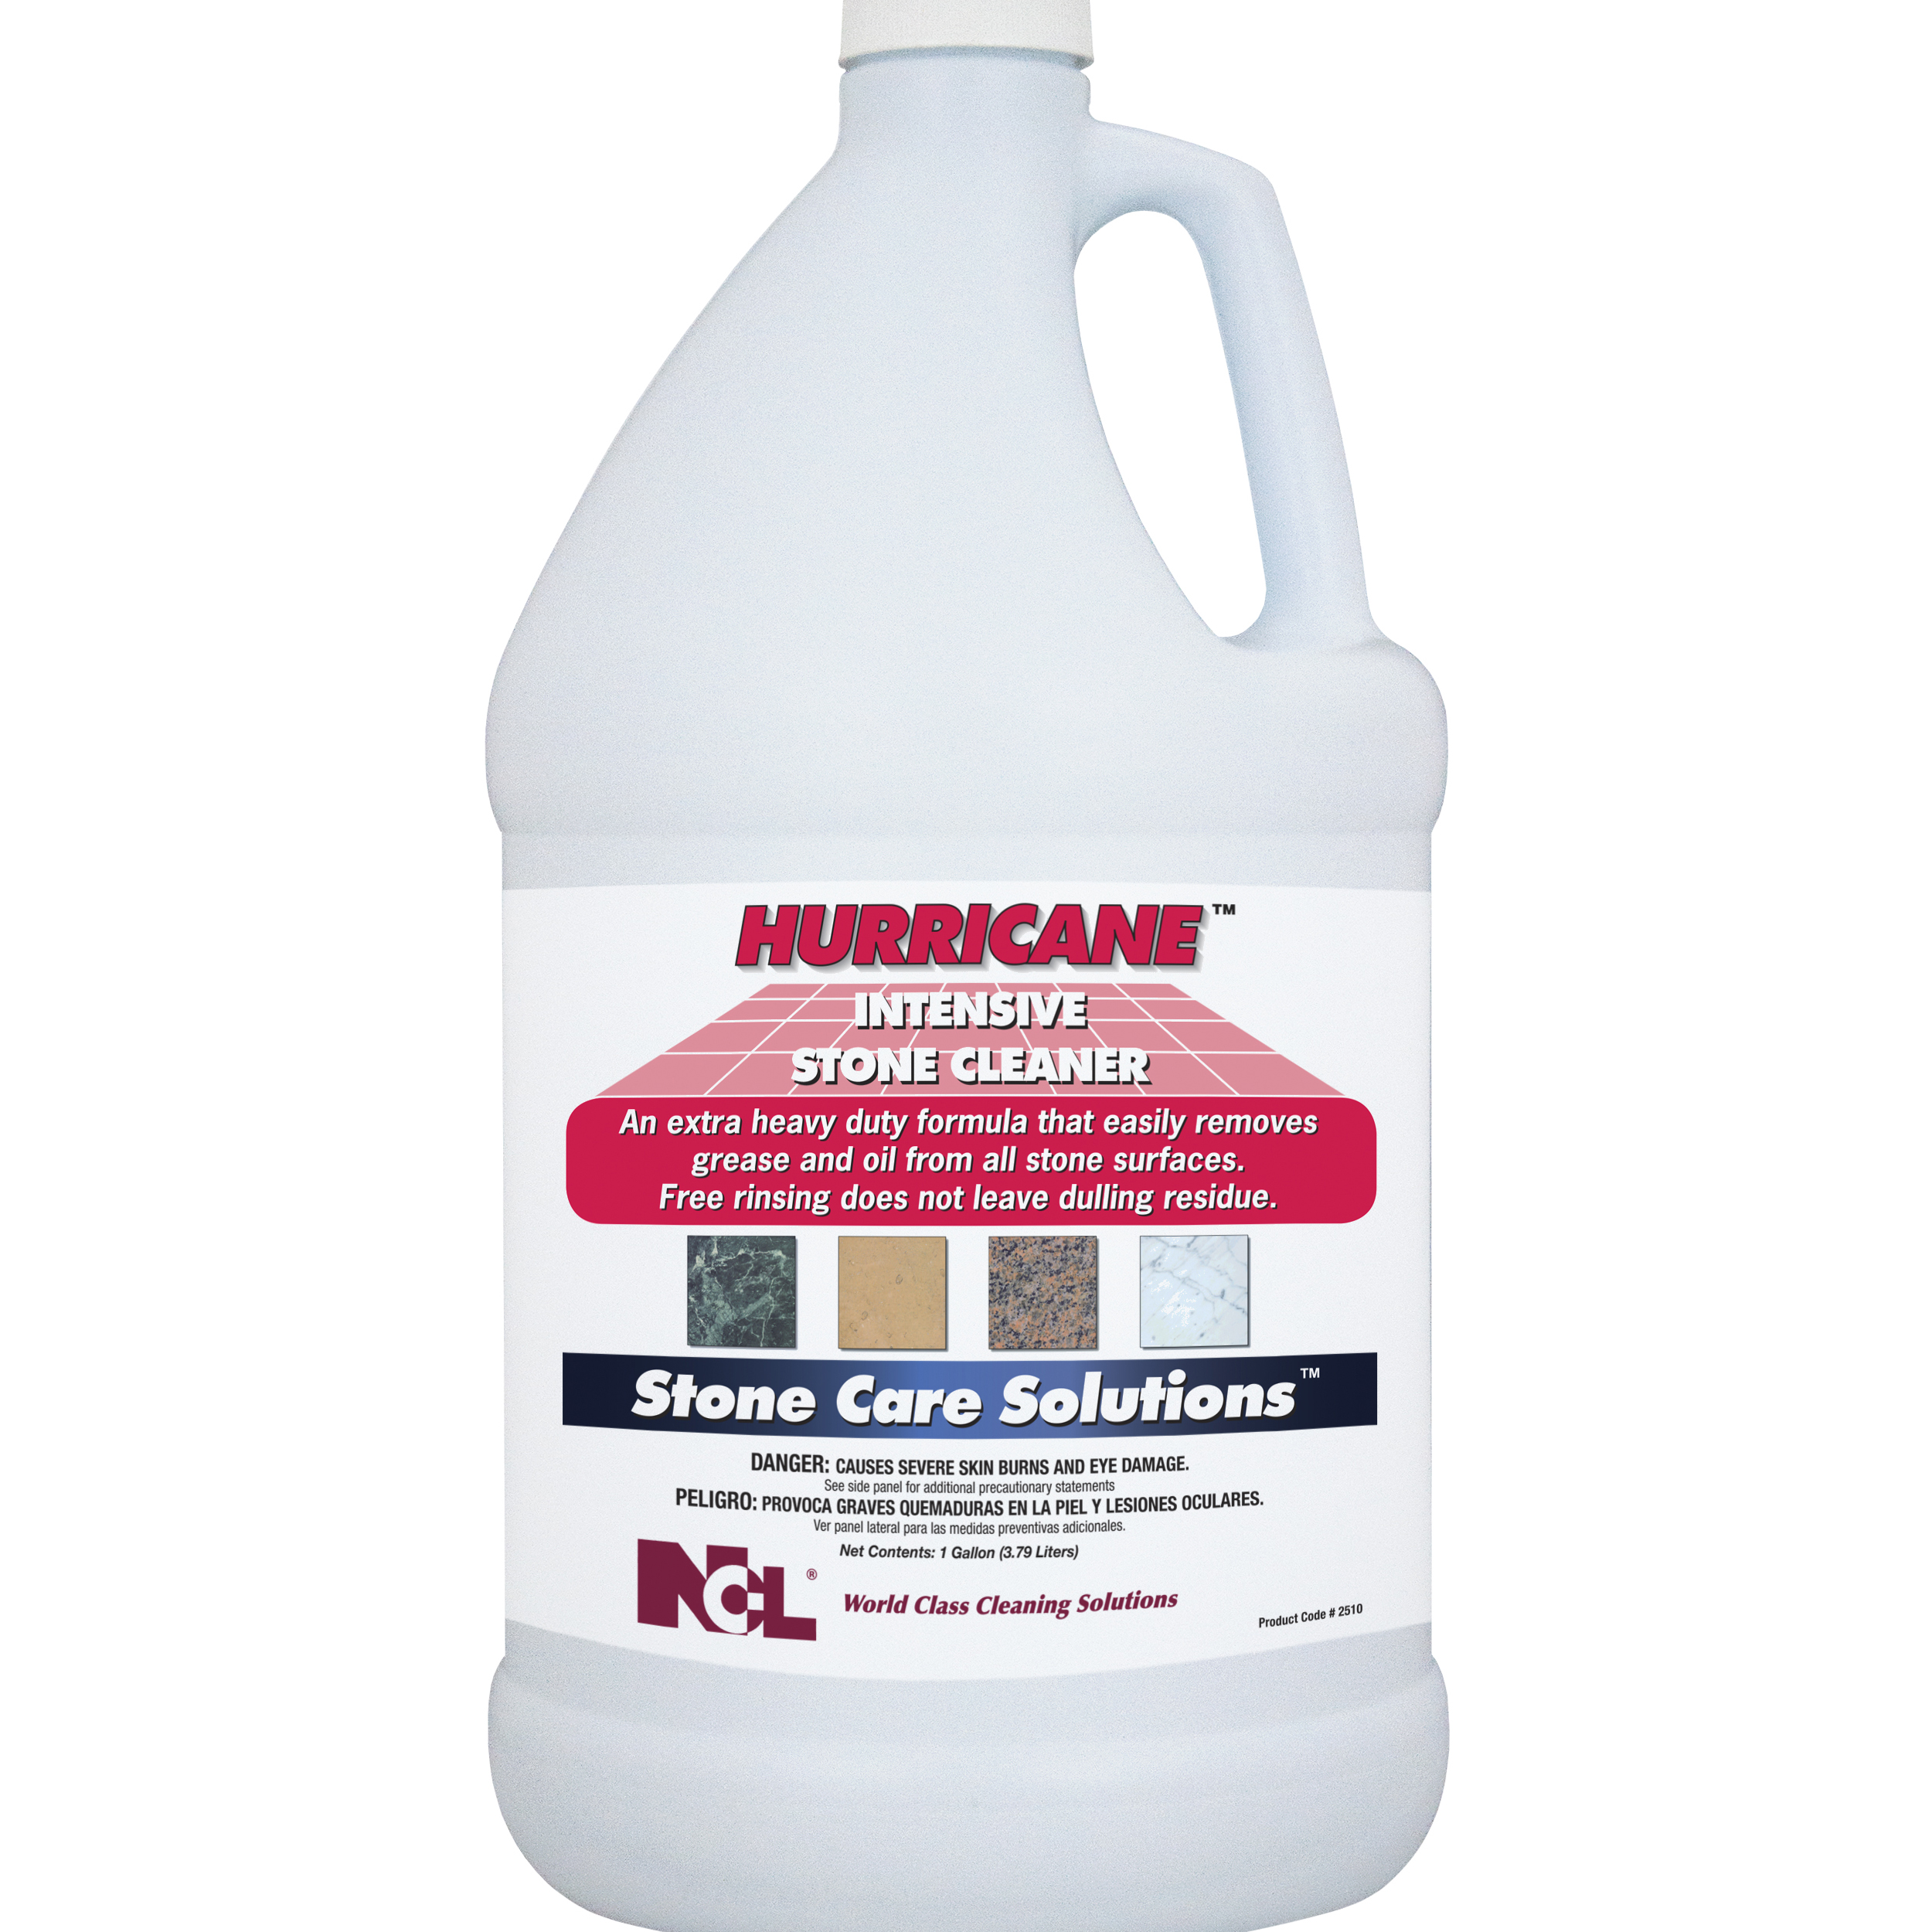  HURRICANE Intensive Stone Cleaner 4/1 Gal. Case (NCL2510-29) 